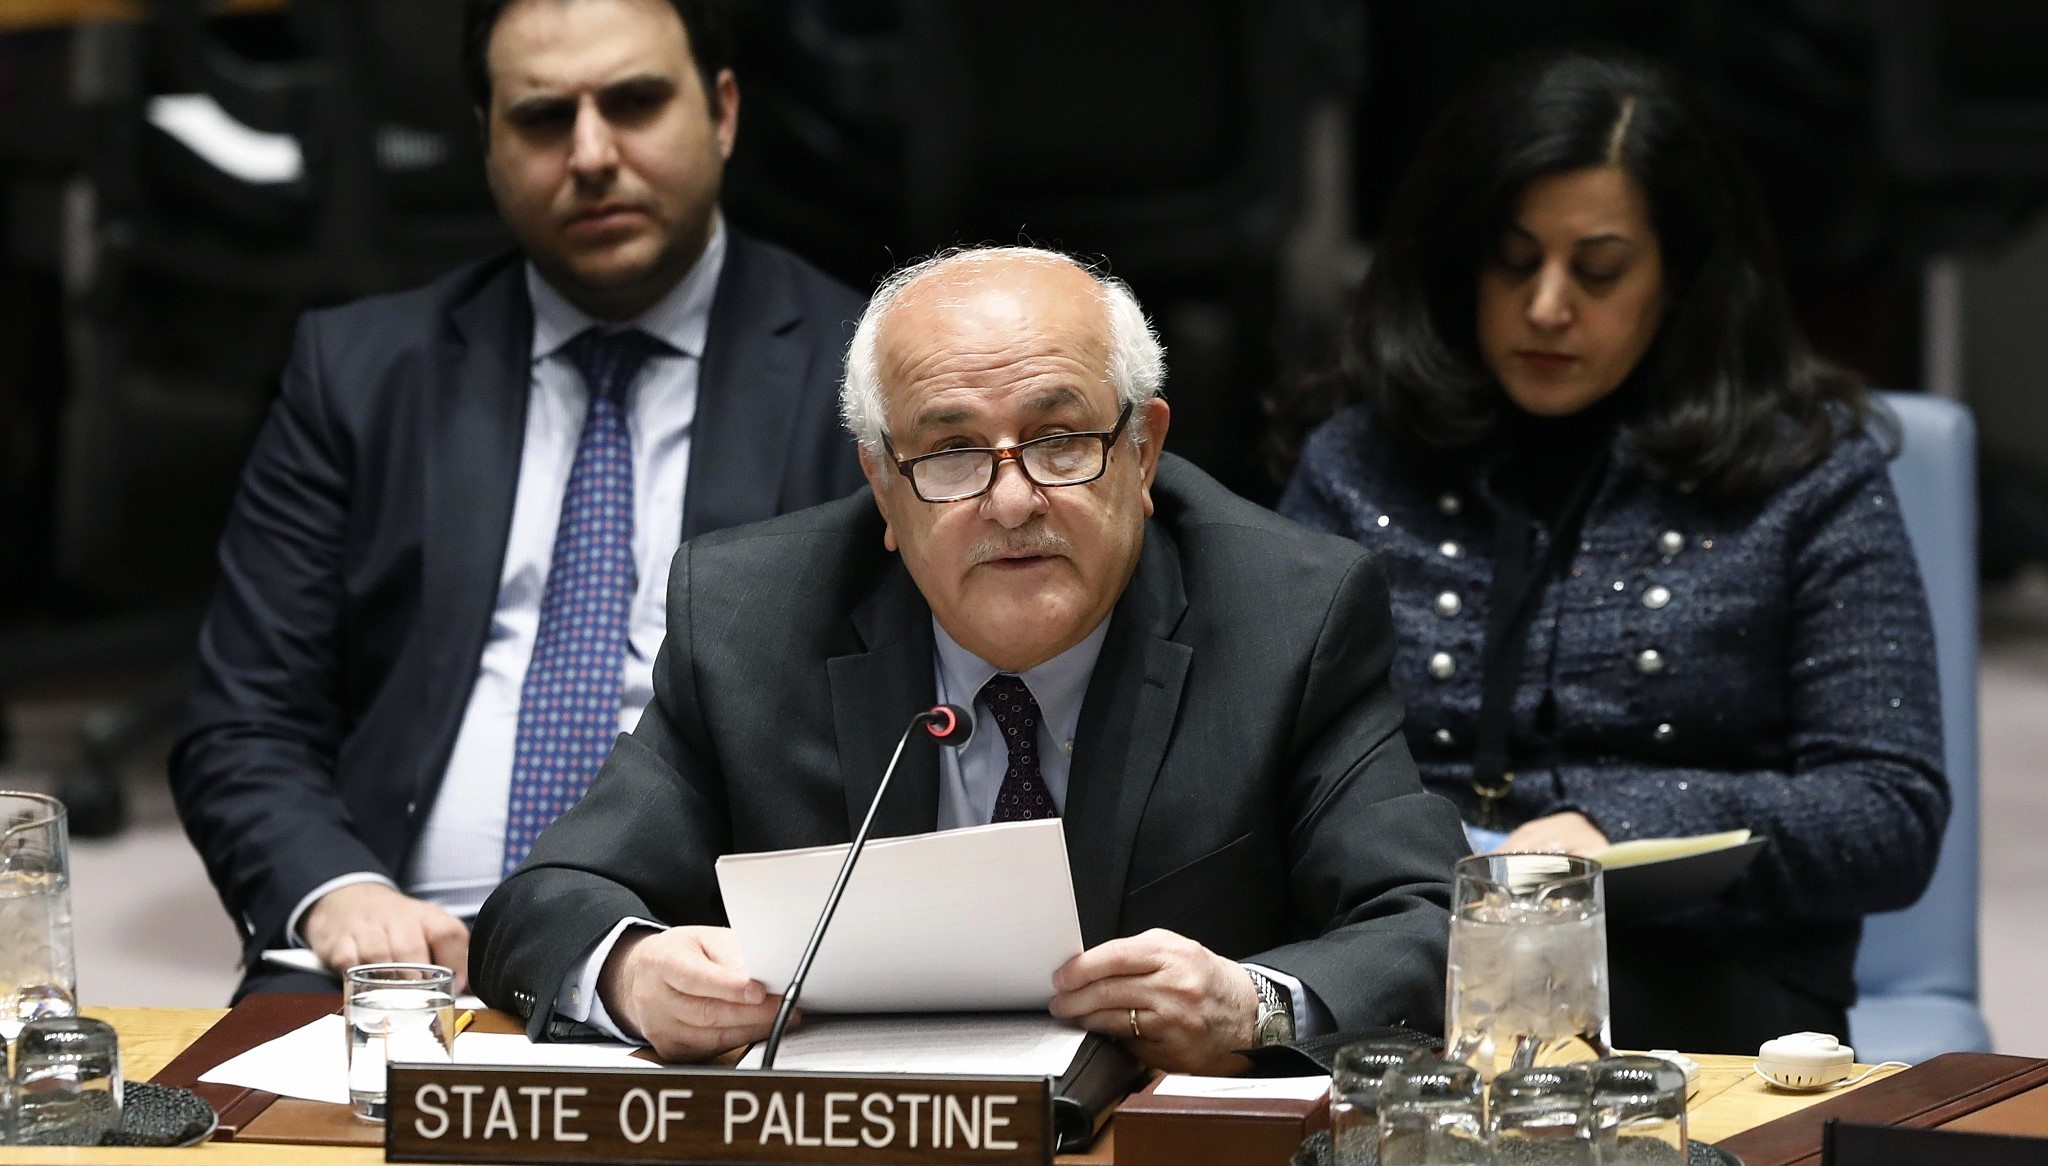 Palestine's Permanent Observer to the United Nations, Riyad Mansour